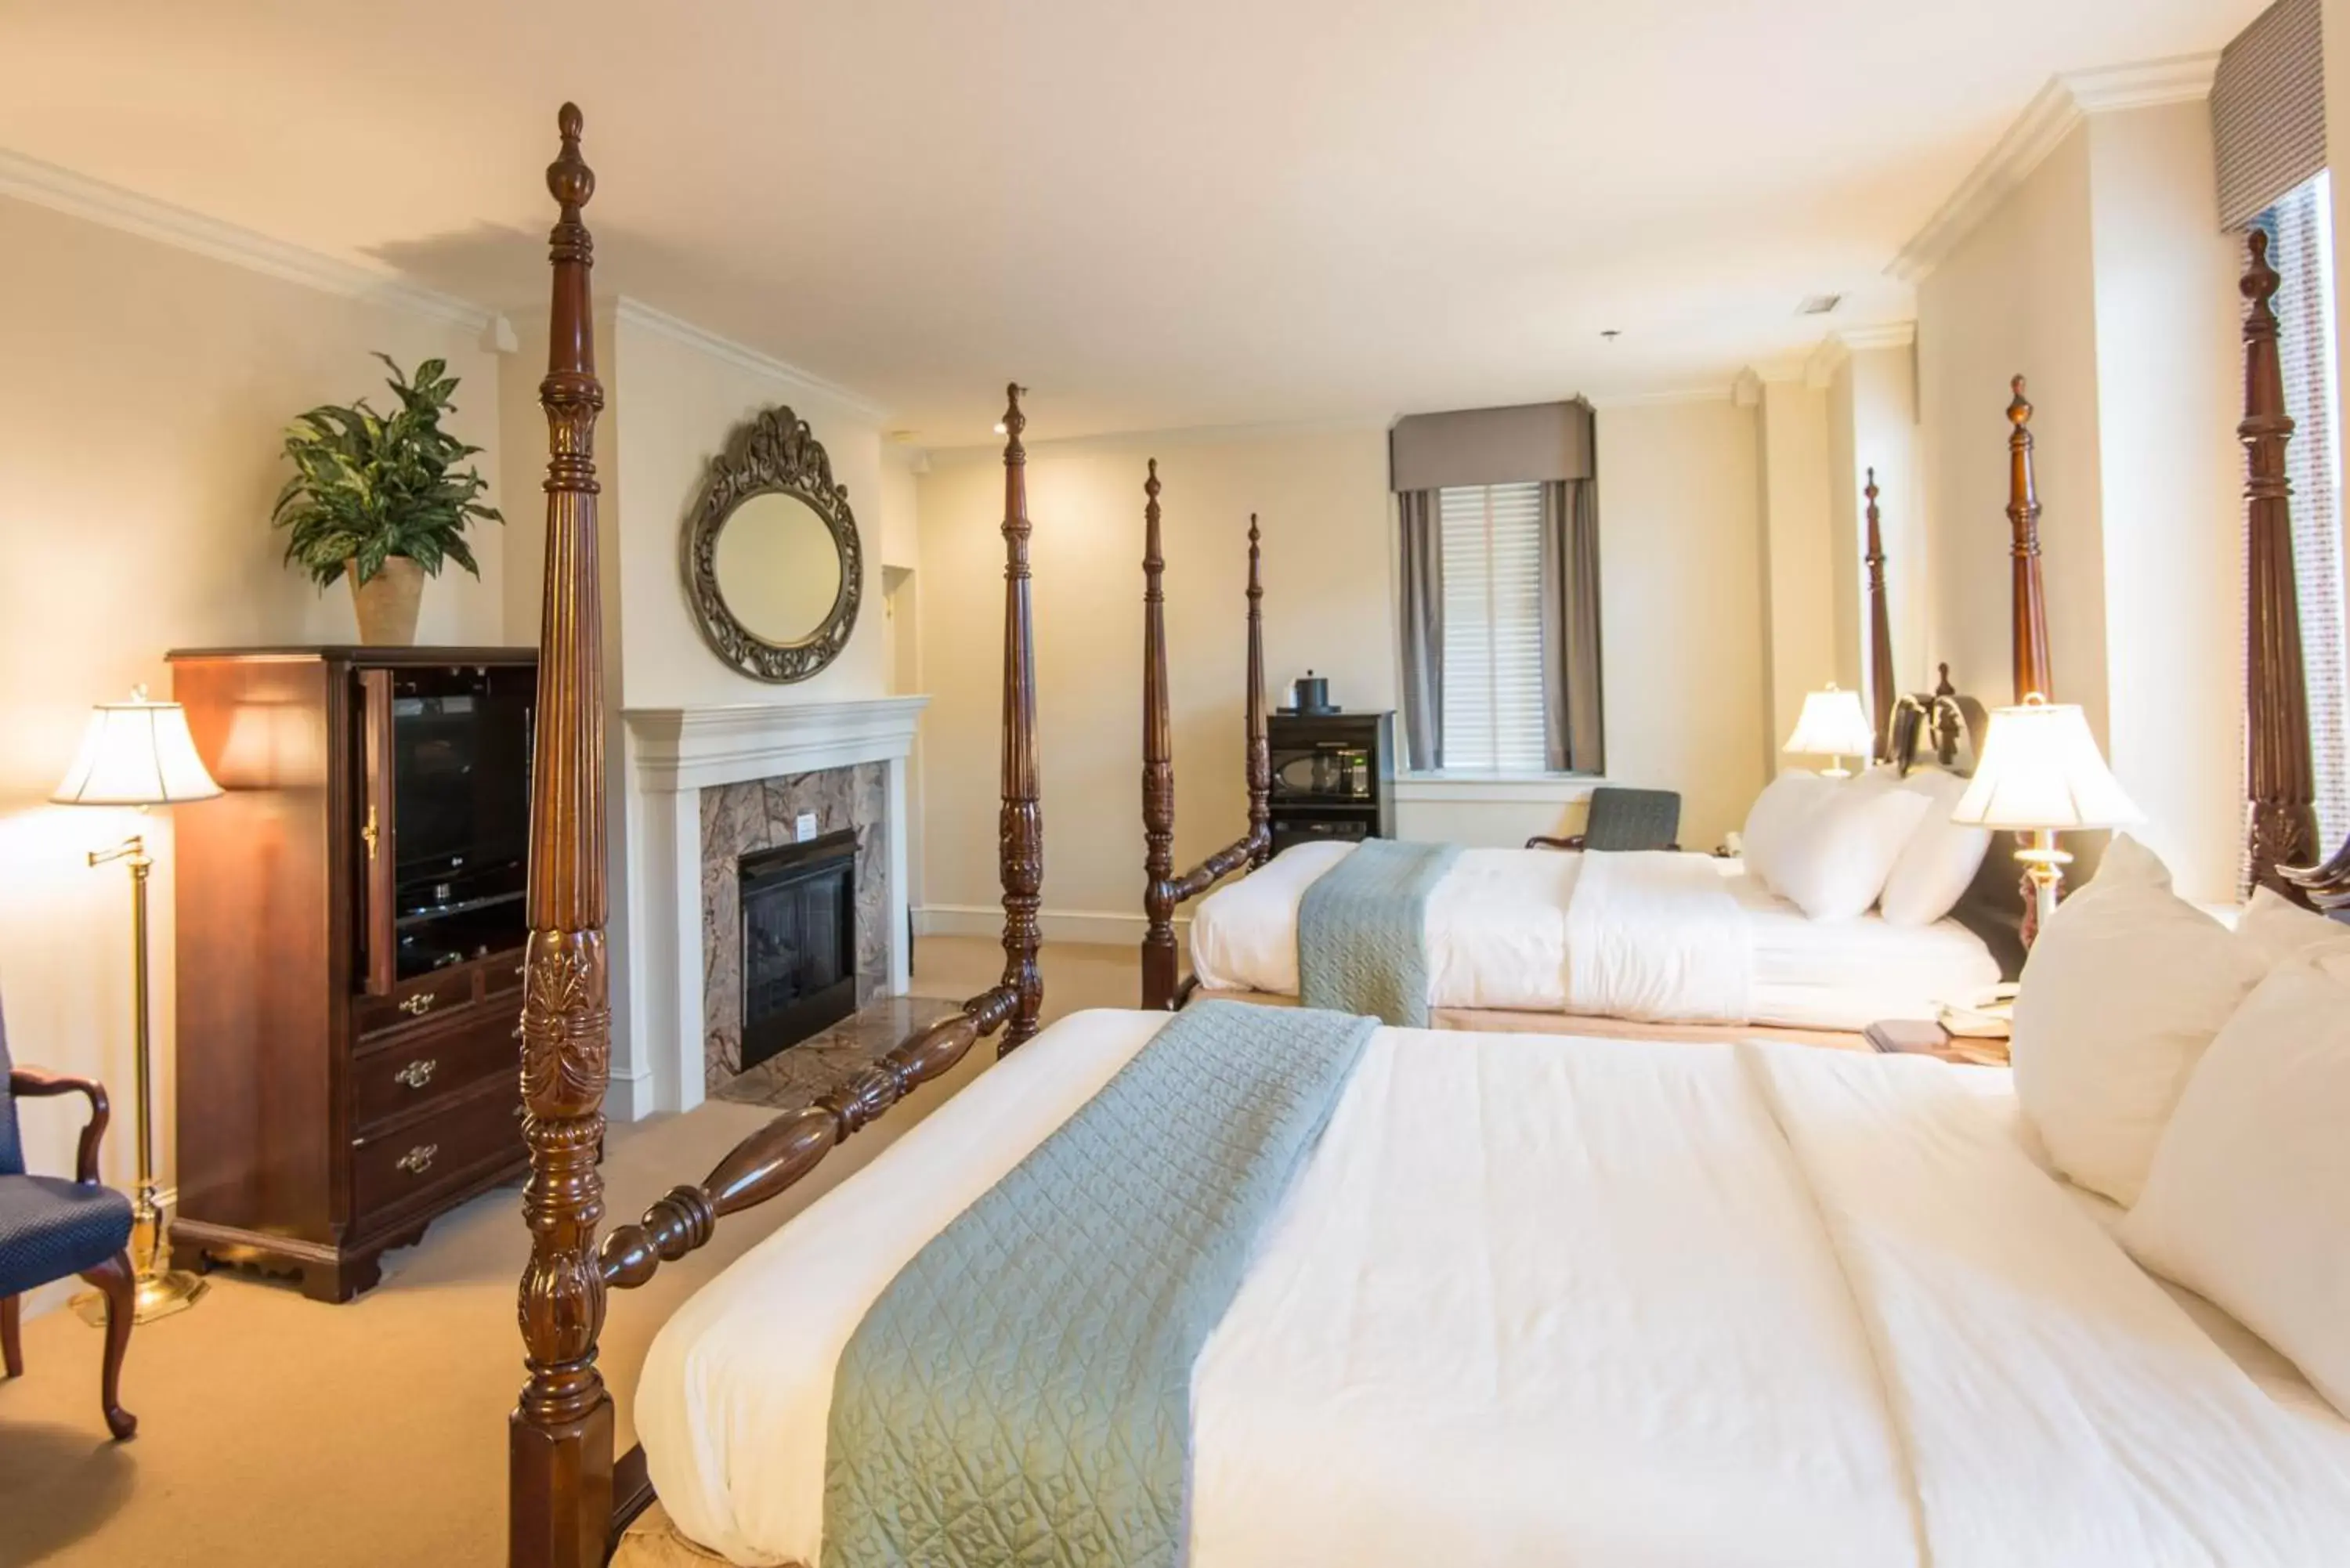 Deluxe Queen Room with Two Queen Beds in Fort Harrison State Park Inn